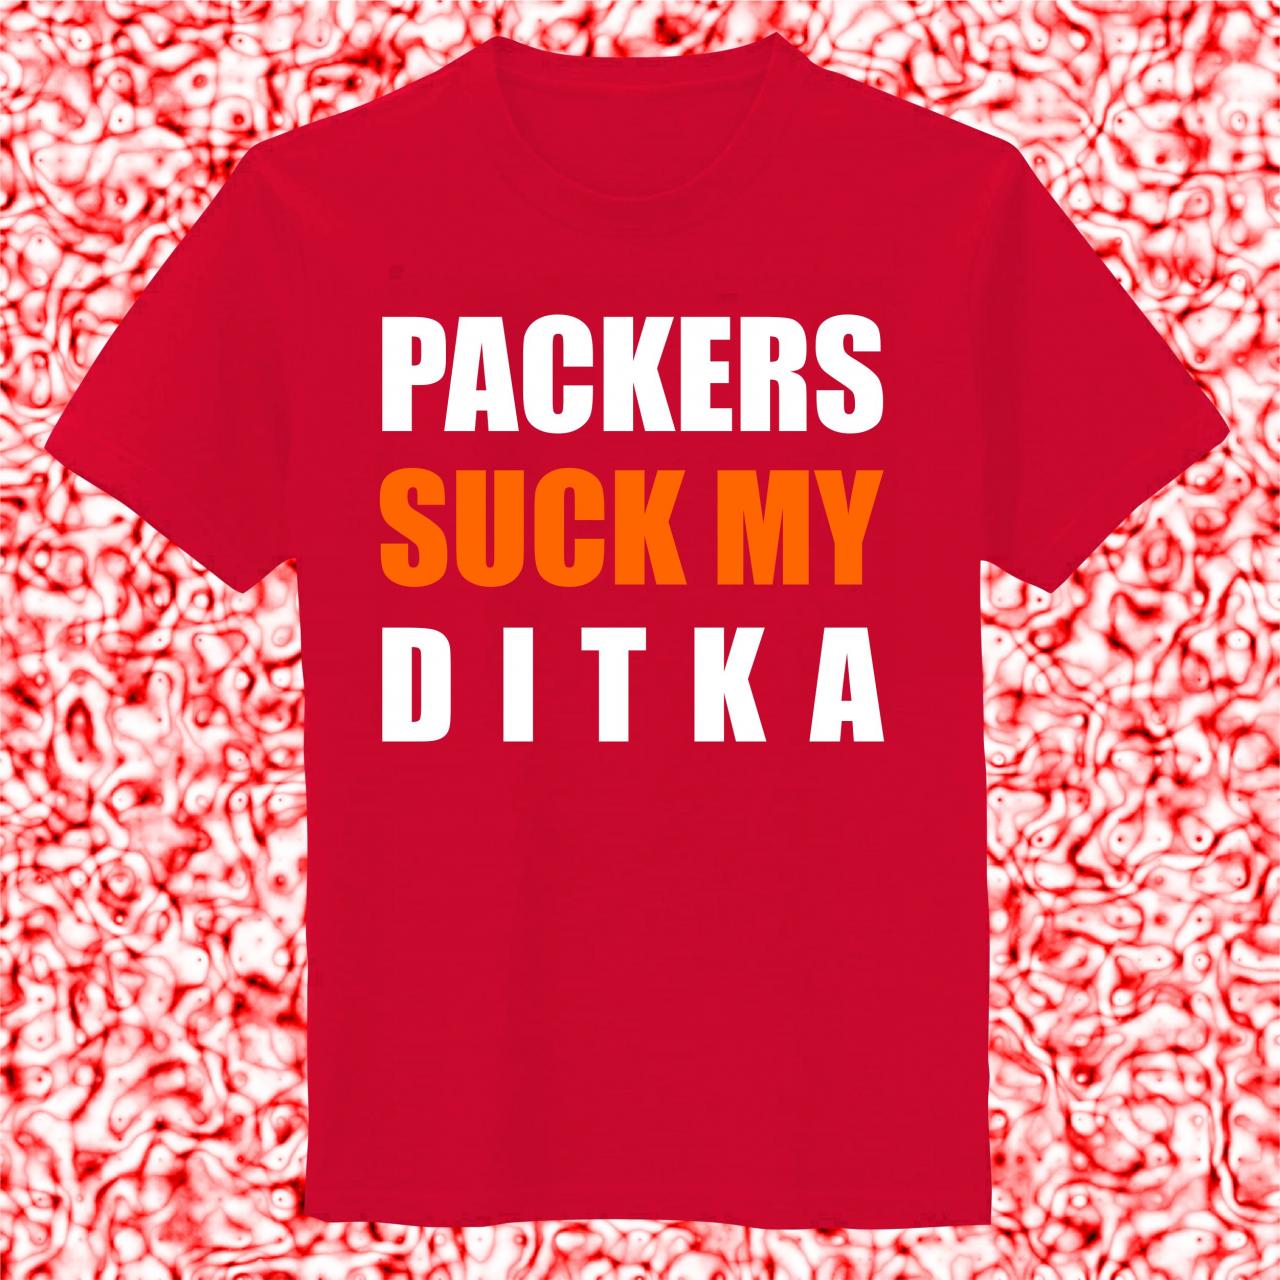 Packers Suck My Ditka T-shirt Mens And Womens Cotton Screenprint Size S - 3xl